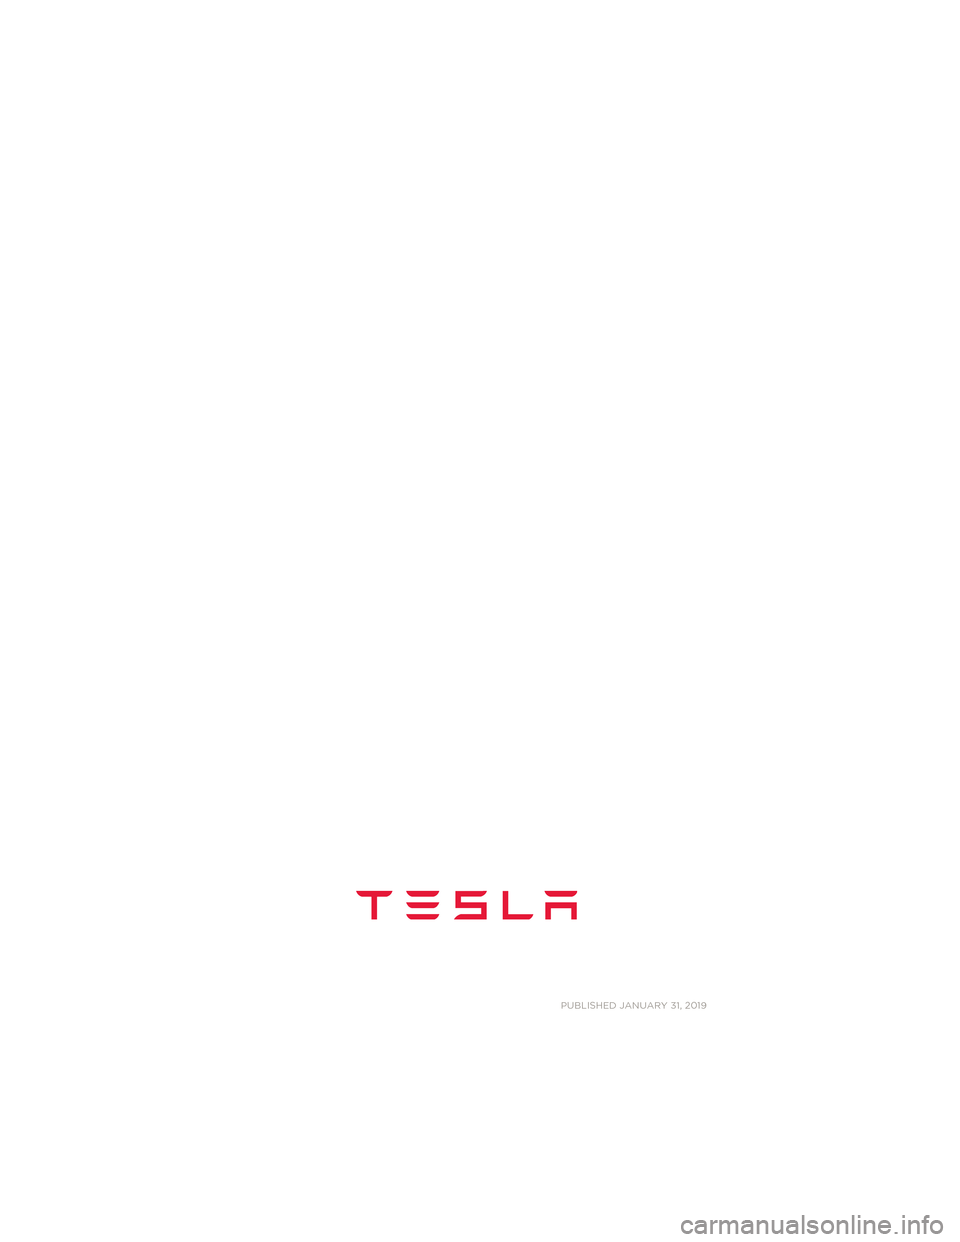 TESLA MODEL 3 2019  Manuel du propriétaire (in French) PUBLISHED JANUARY 31, 2019
Model S Quick Guide - NA Rev C.book  Page
 2  Wednesday, December 18, 2013  12:40 PM 